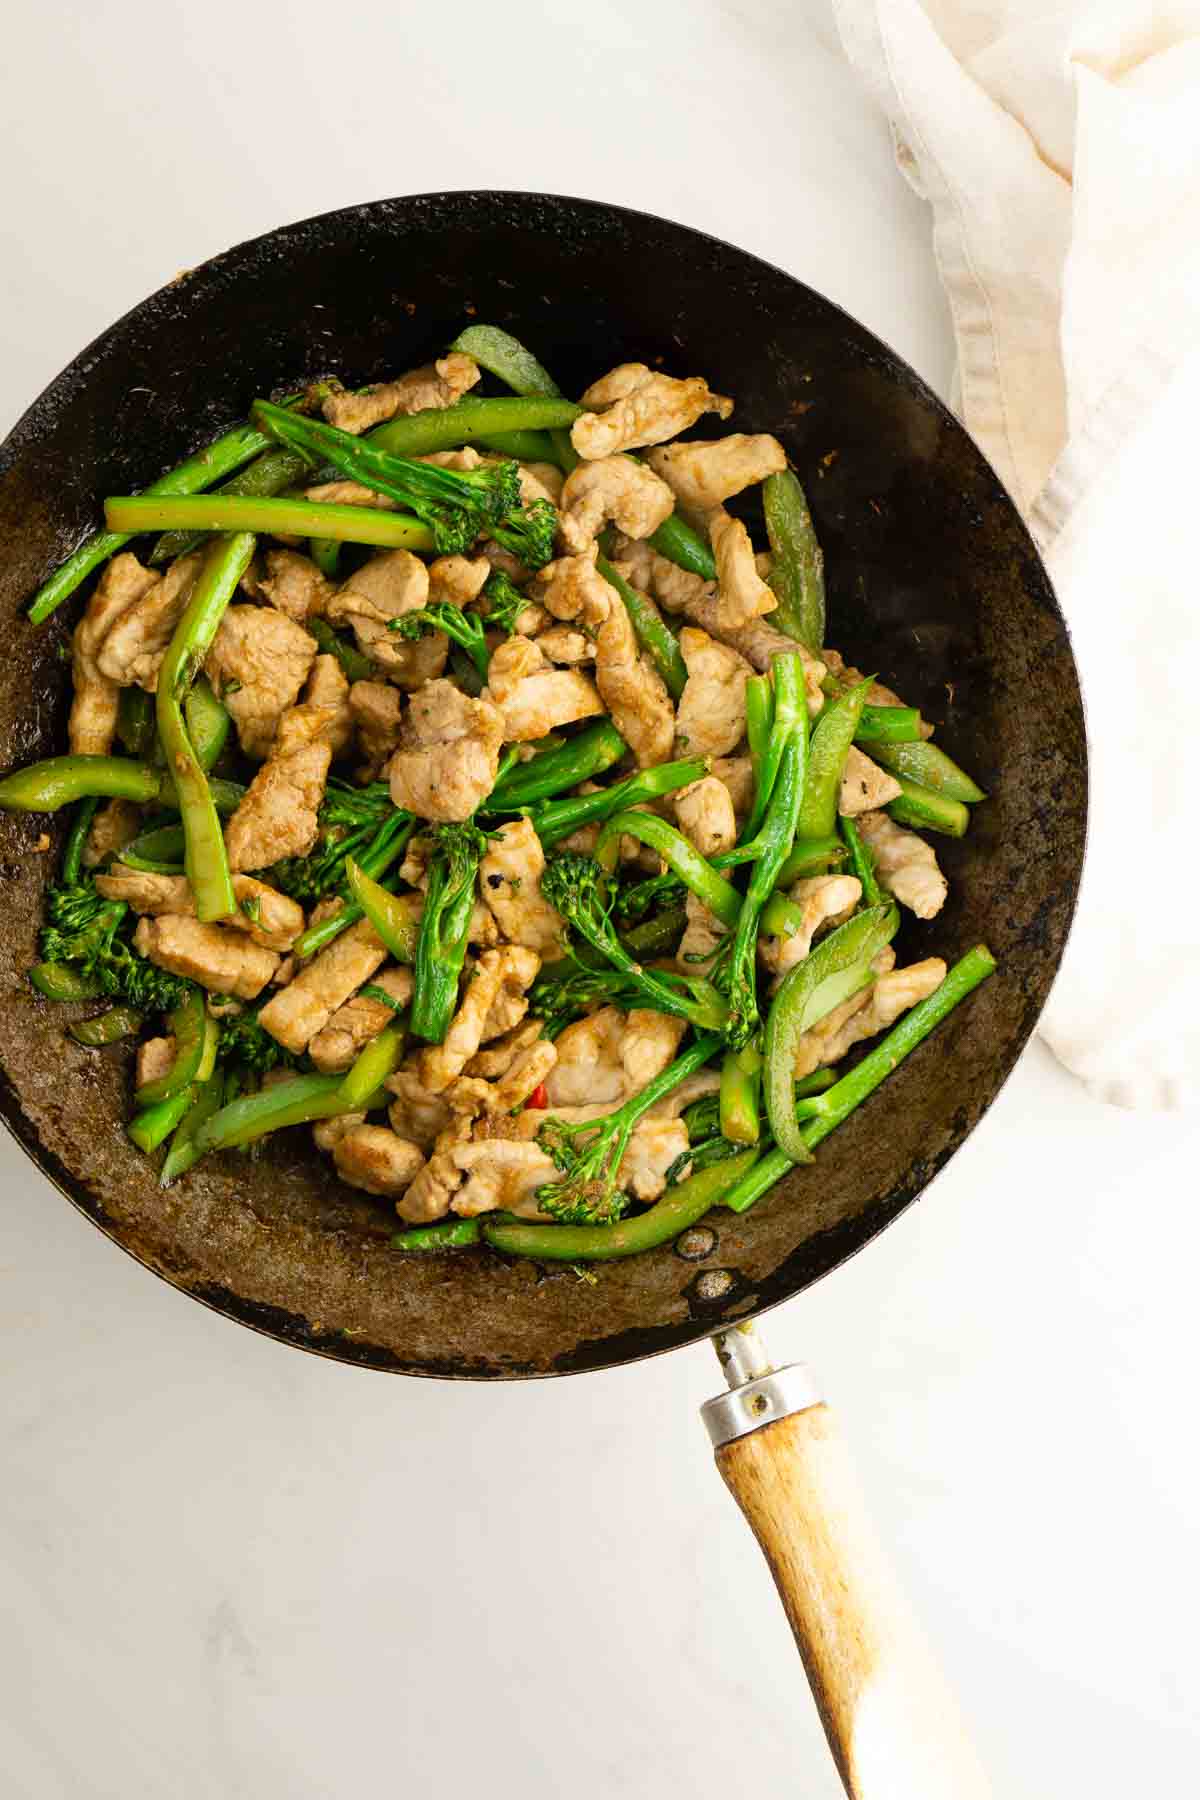 Pork and green vegetables cooked in a wok